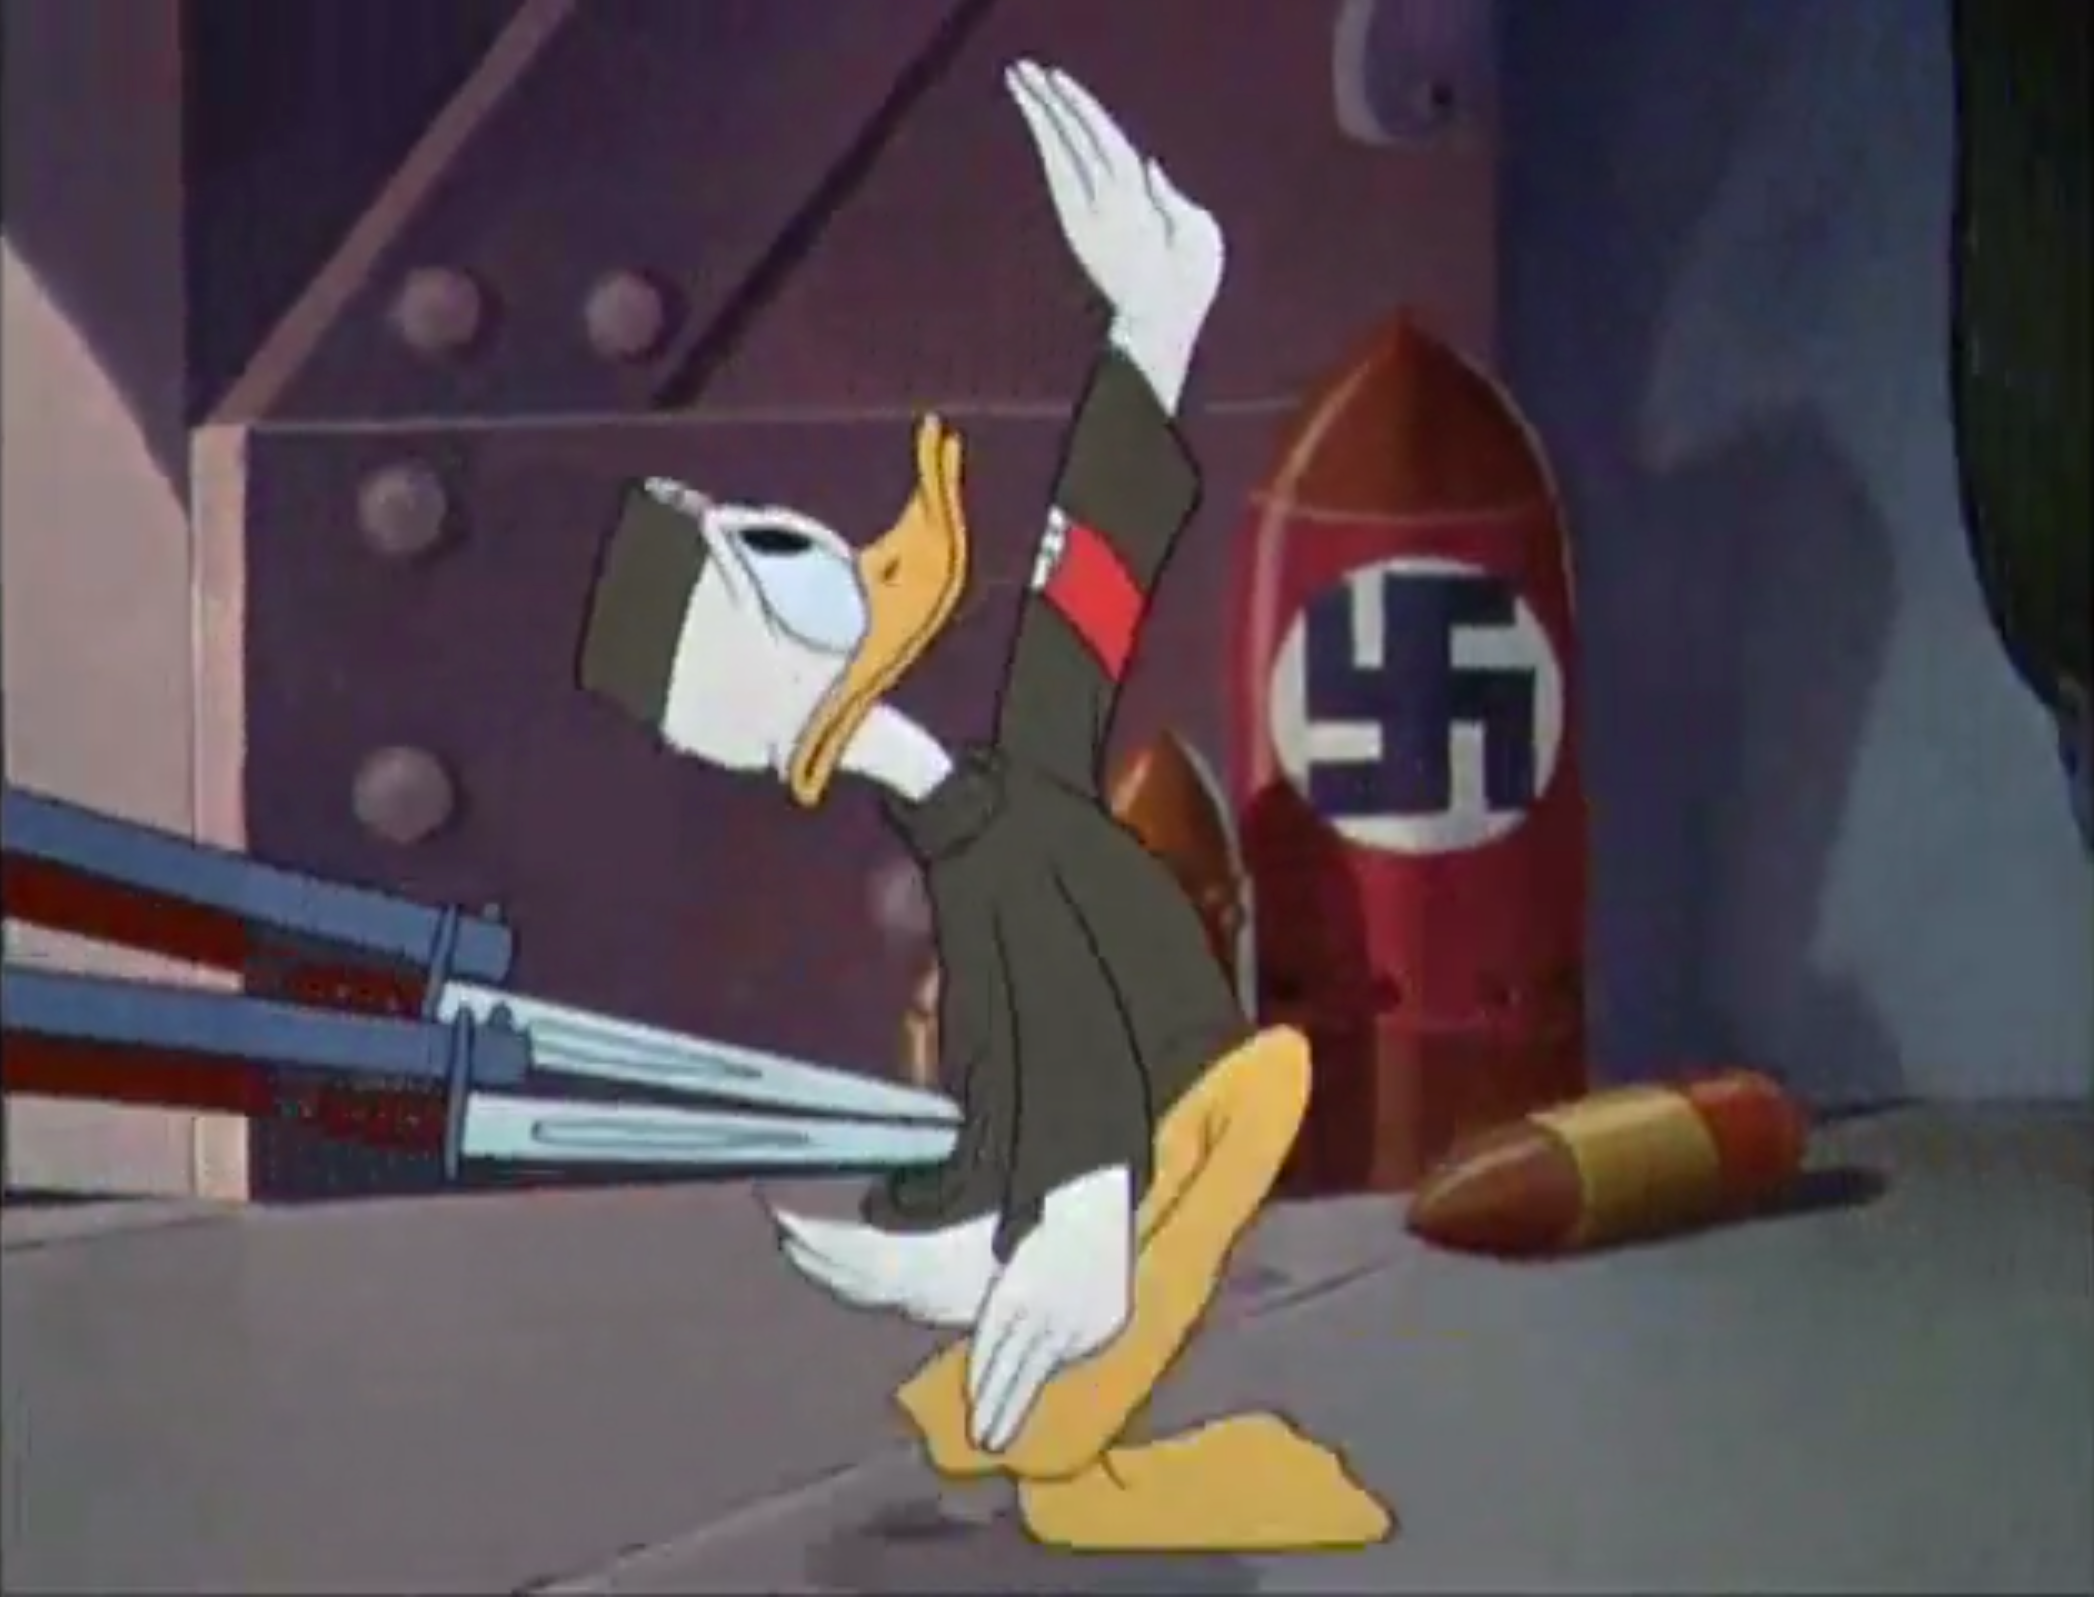 Finally, Russia Lifts the Ban on a WWII Donald Duck Cartoon - Atlas Obscura